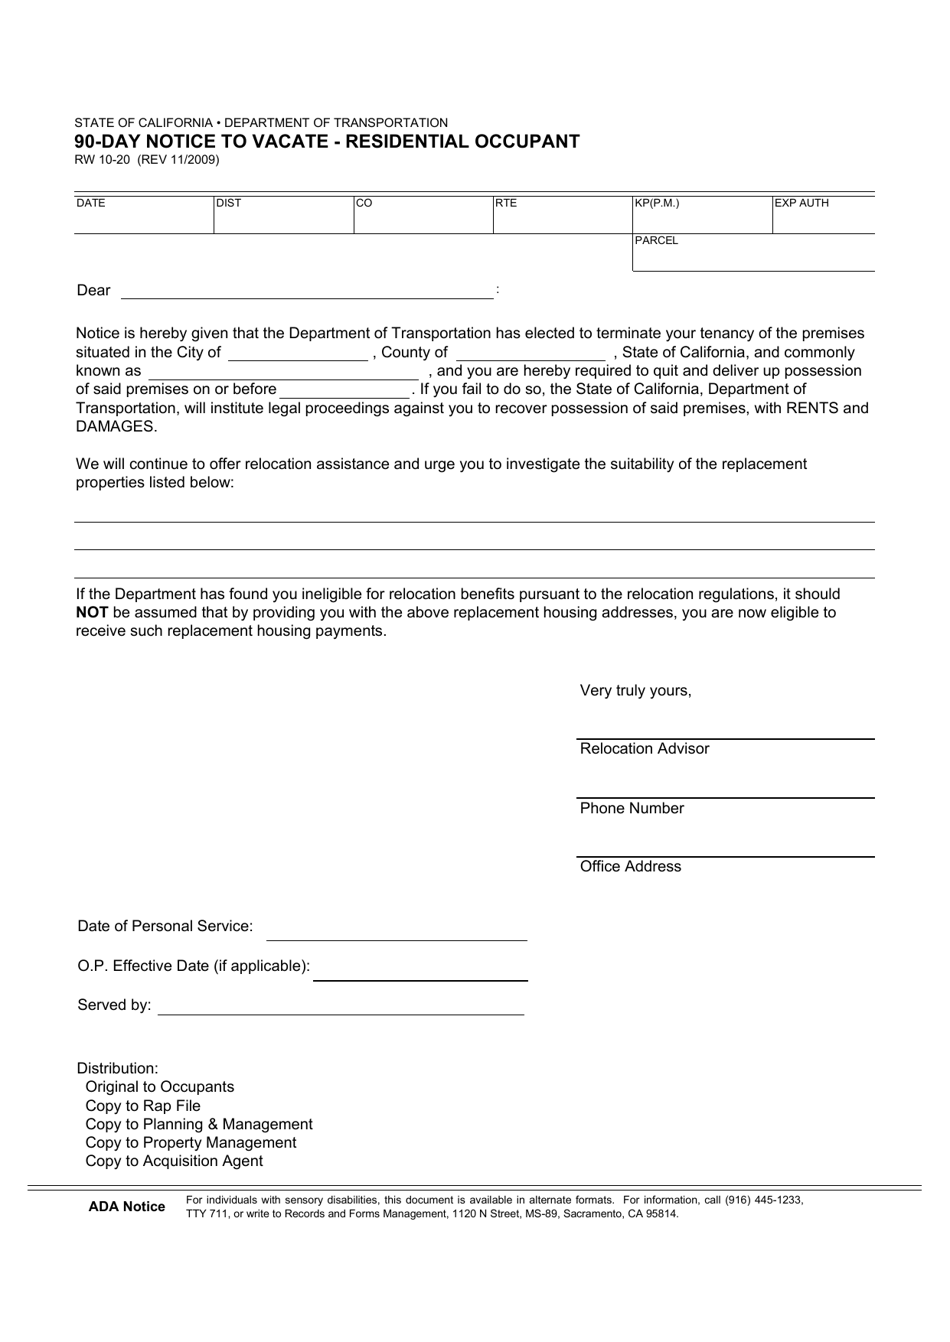 form-rw10-20-download-fillable-pdf-or-fill-online-90-day-notice-to